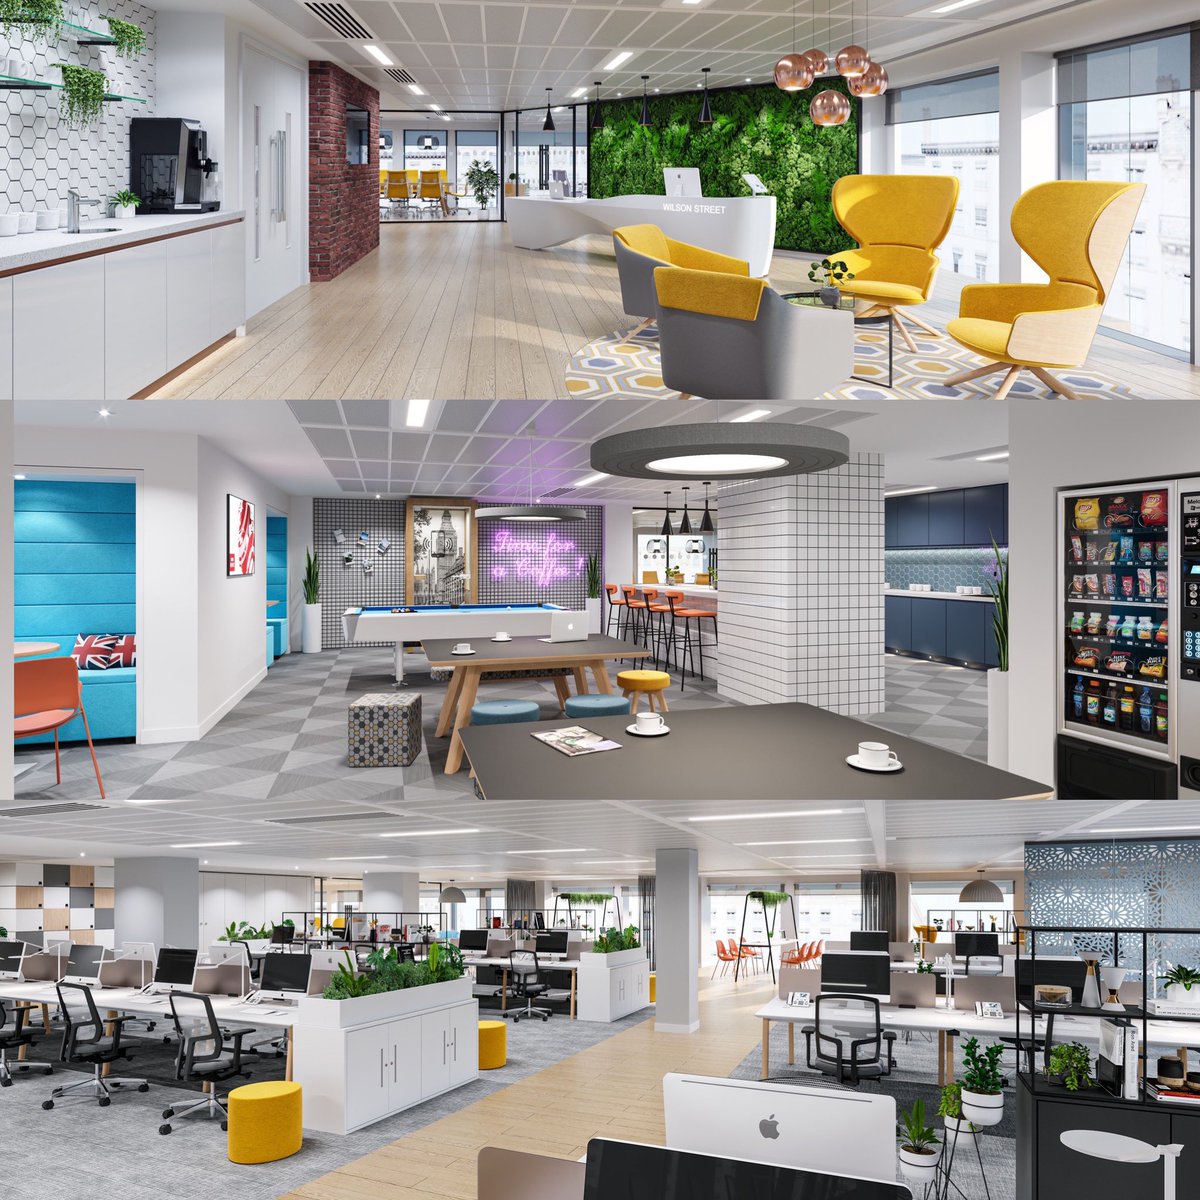 The team have been busy creating some vibrant and welcoming environments for our clients, in readiness for their staff to return to the office. #interiordesign #workplace #officedesign #backtotheoffice #3Dvisuals